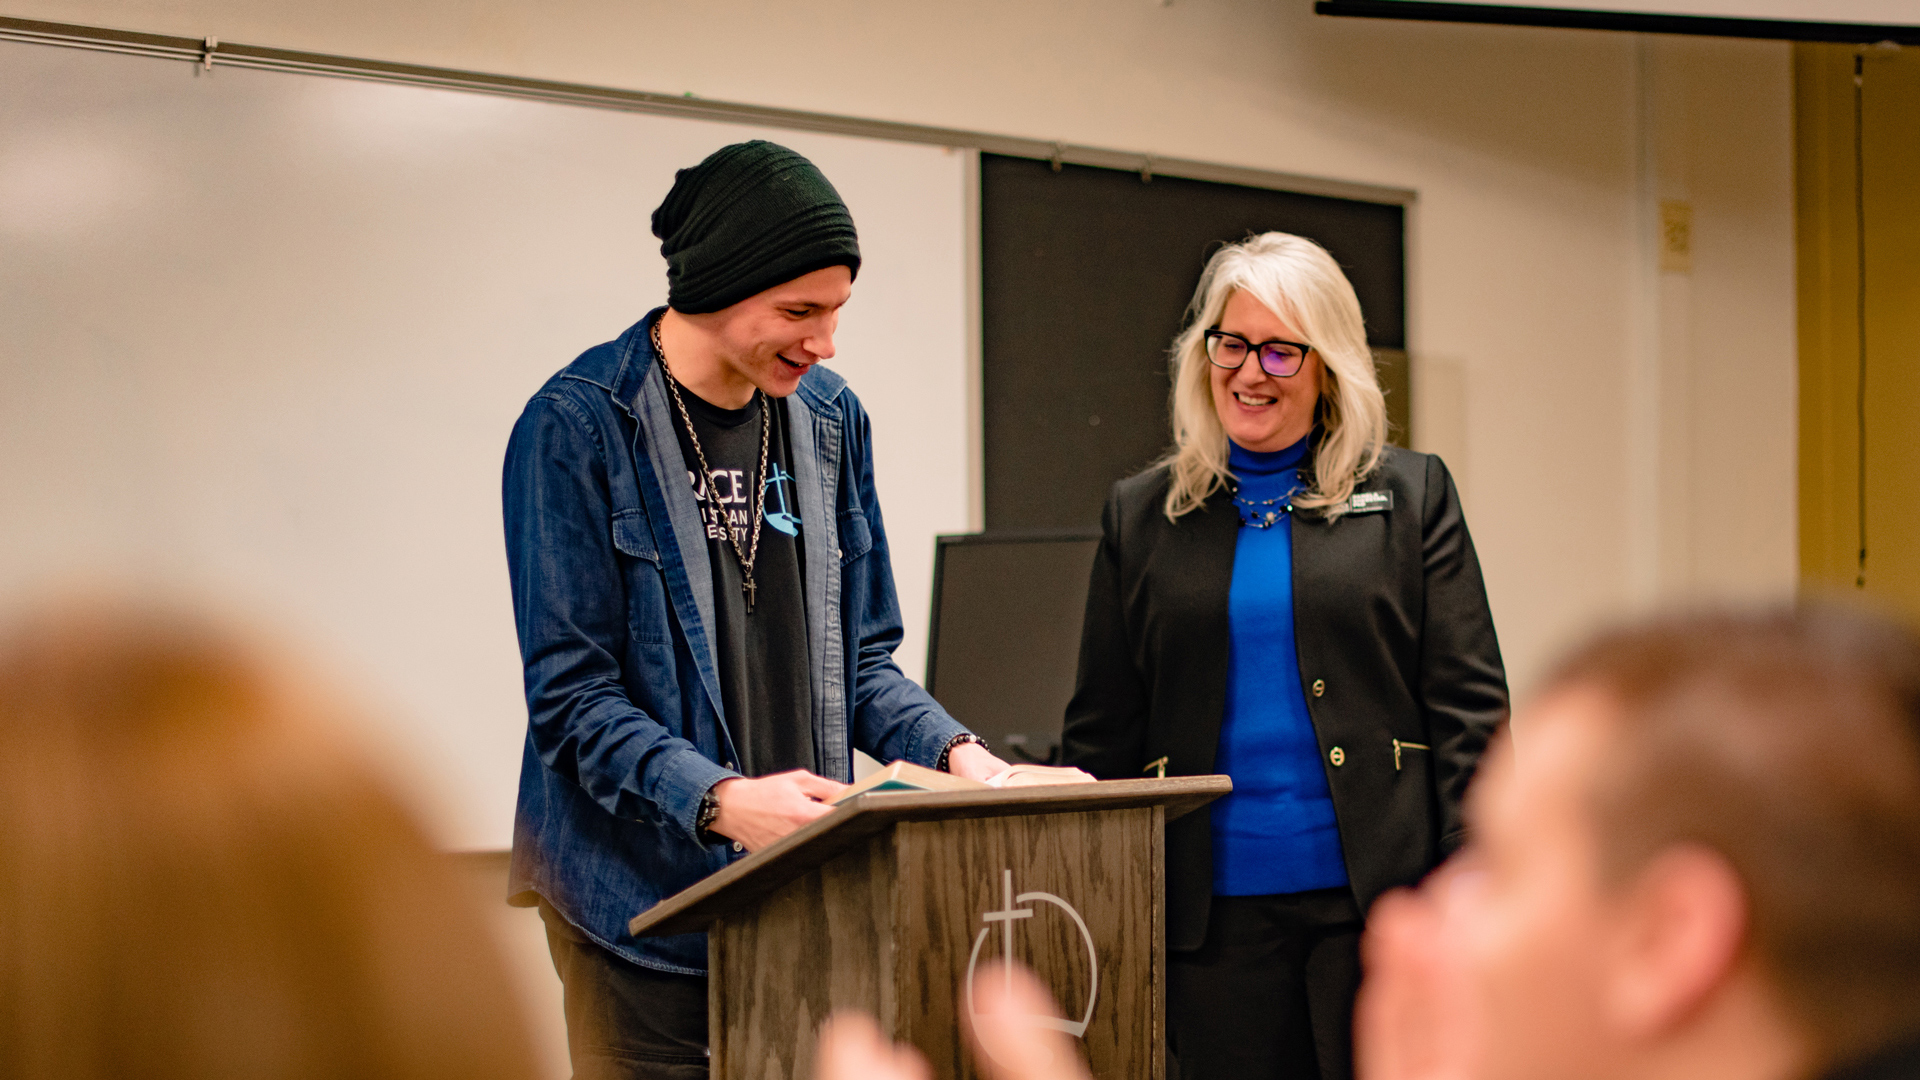 A Grace student and a Professor standing together at the front of a classroom.